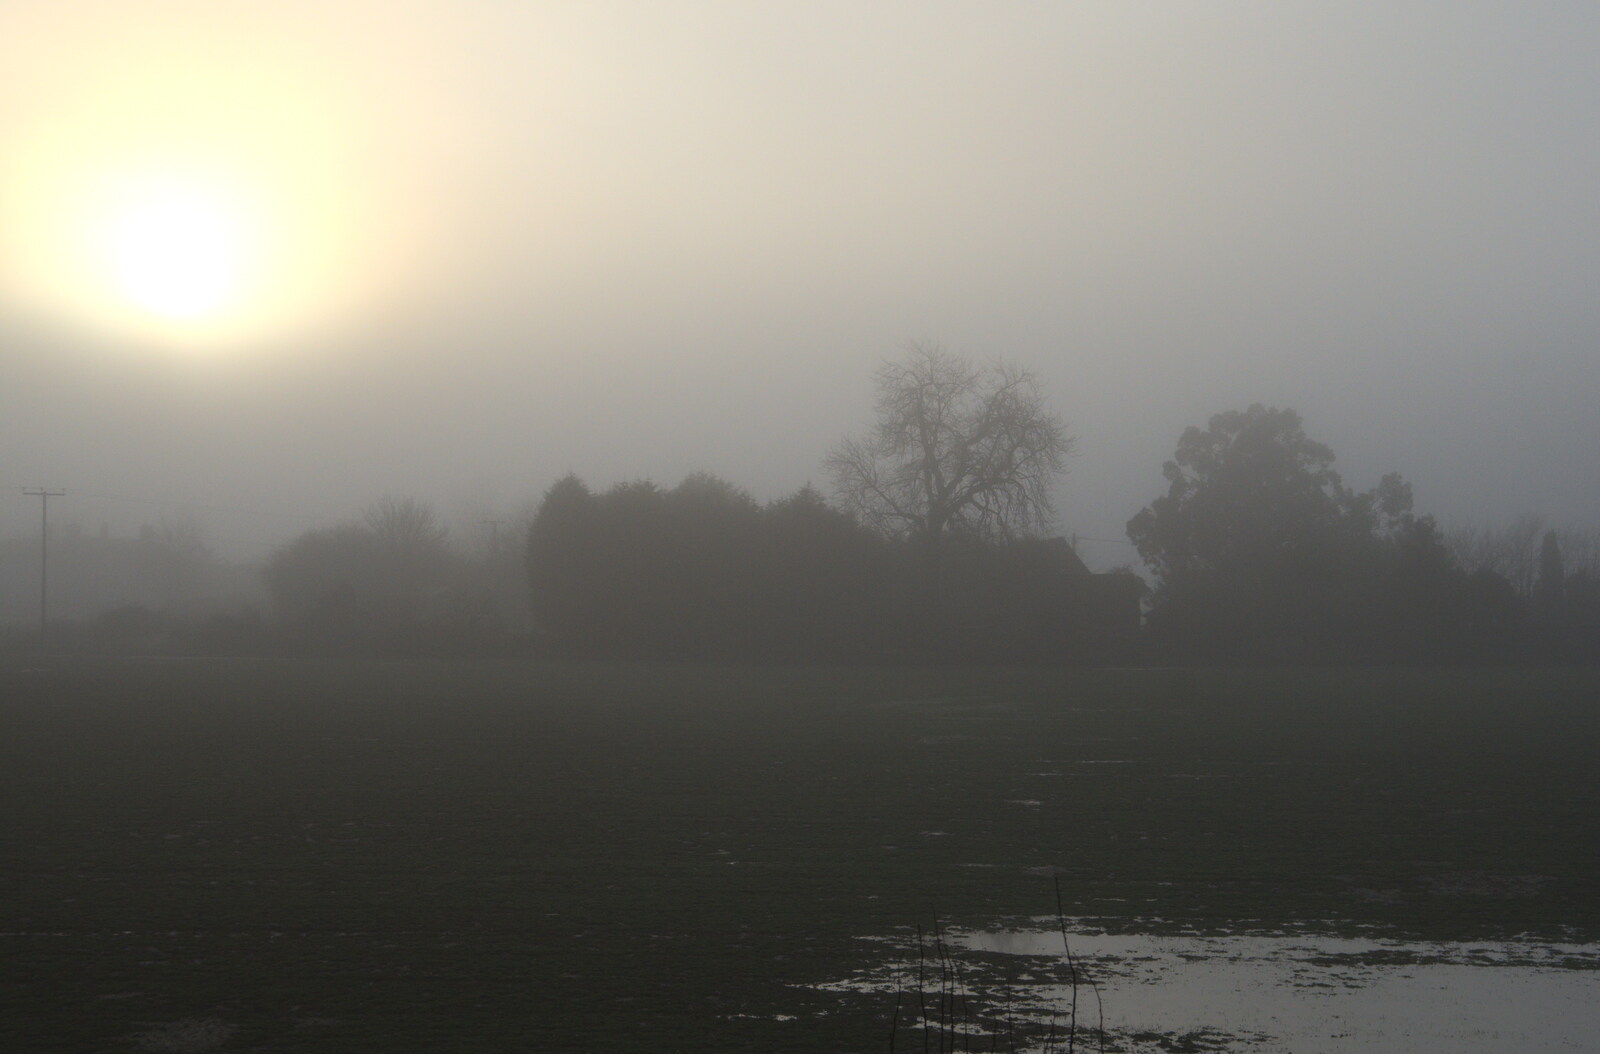 It's a misty morning over the side field from A Virtual New Year's Eve, Brome, Suffolk - 31st December 2020